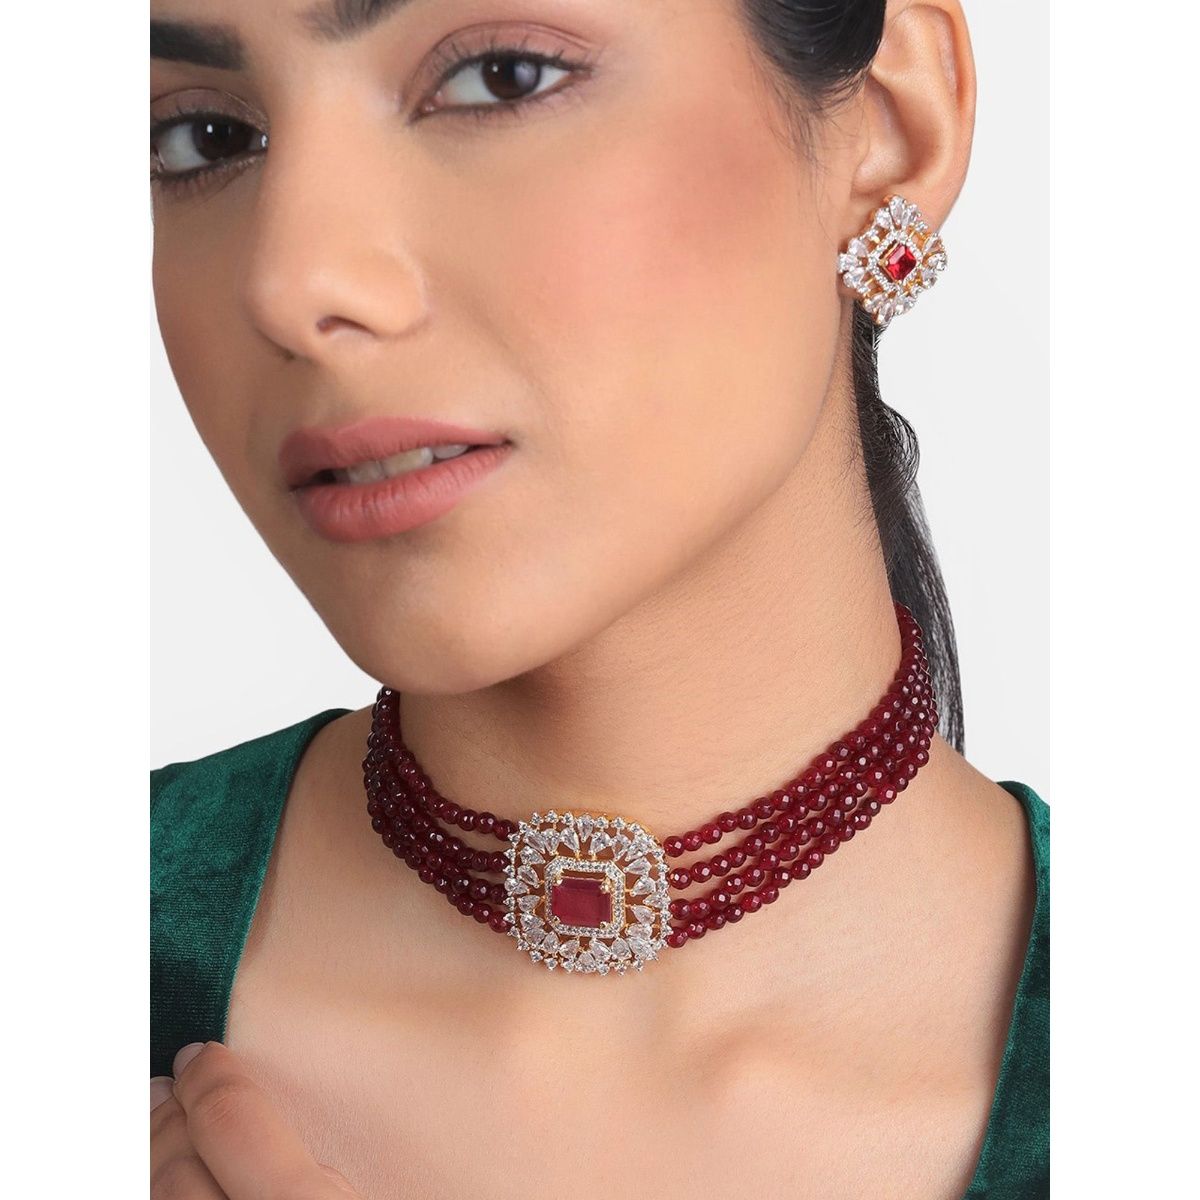 Estele Gold Plated CZ Ruby and Red Beads Choker Square Necklace for Women (Set of 2): Buy Estele Gold Plated CZ Ruby and Red Choker Square Necklace for Women (Set of